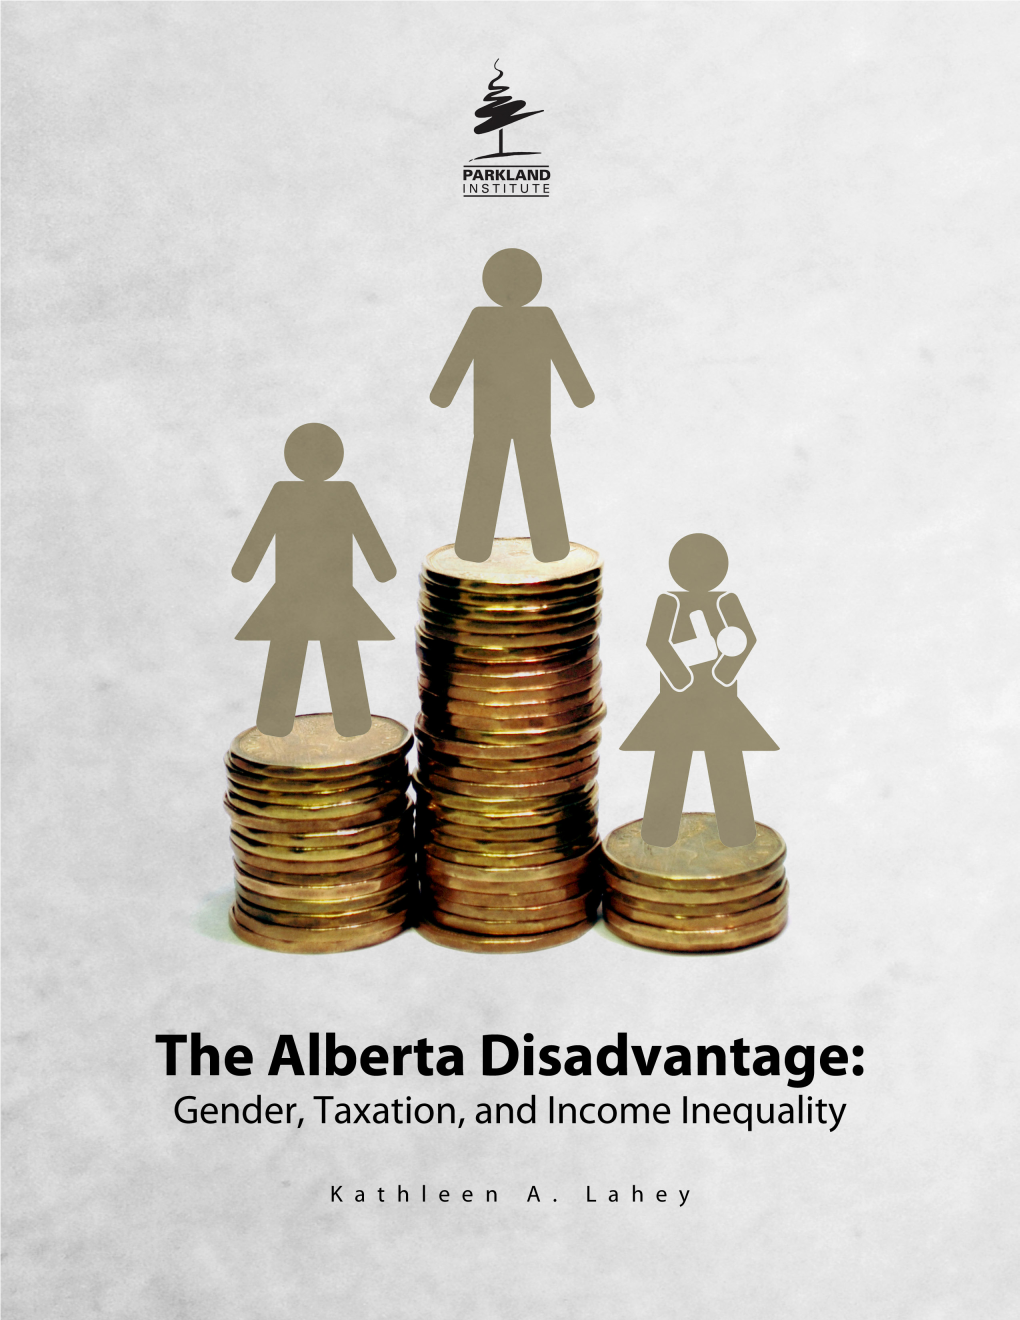 Alberta Disadvantage: Gender, Taxation, and Income Inequality